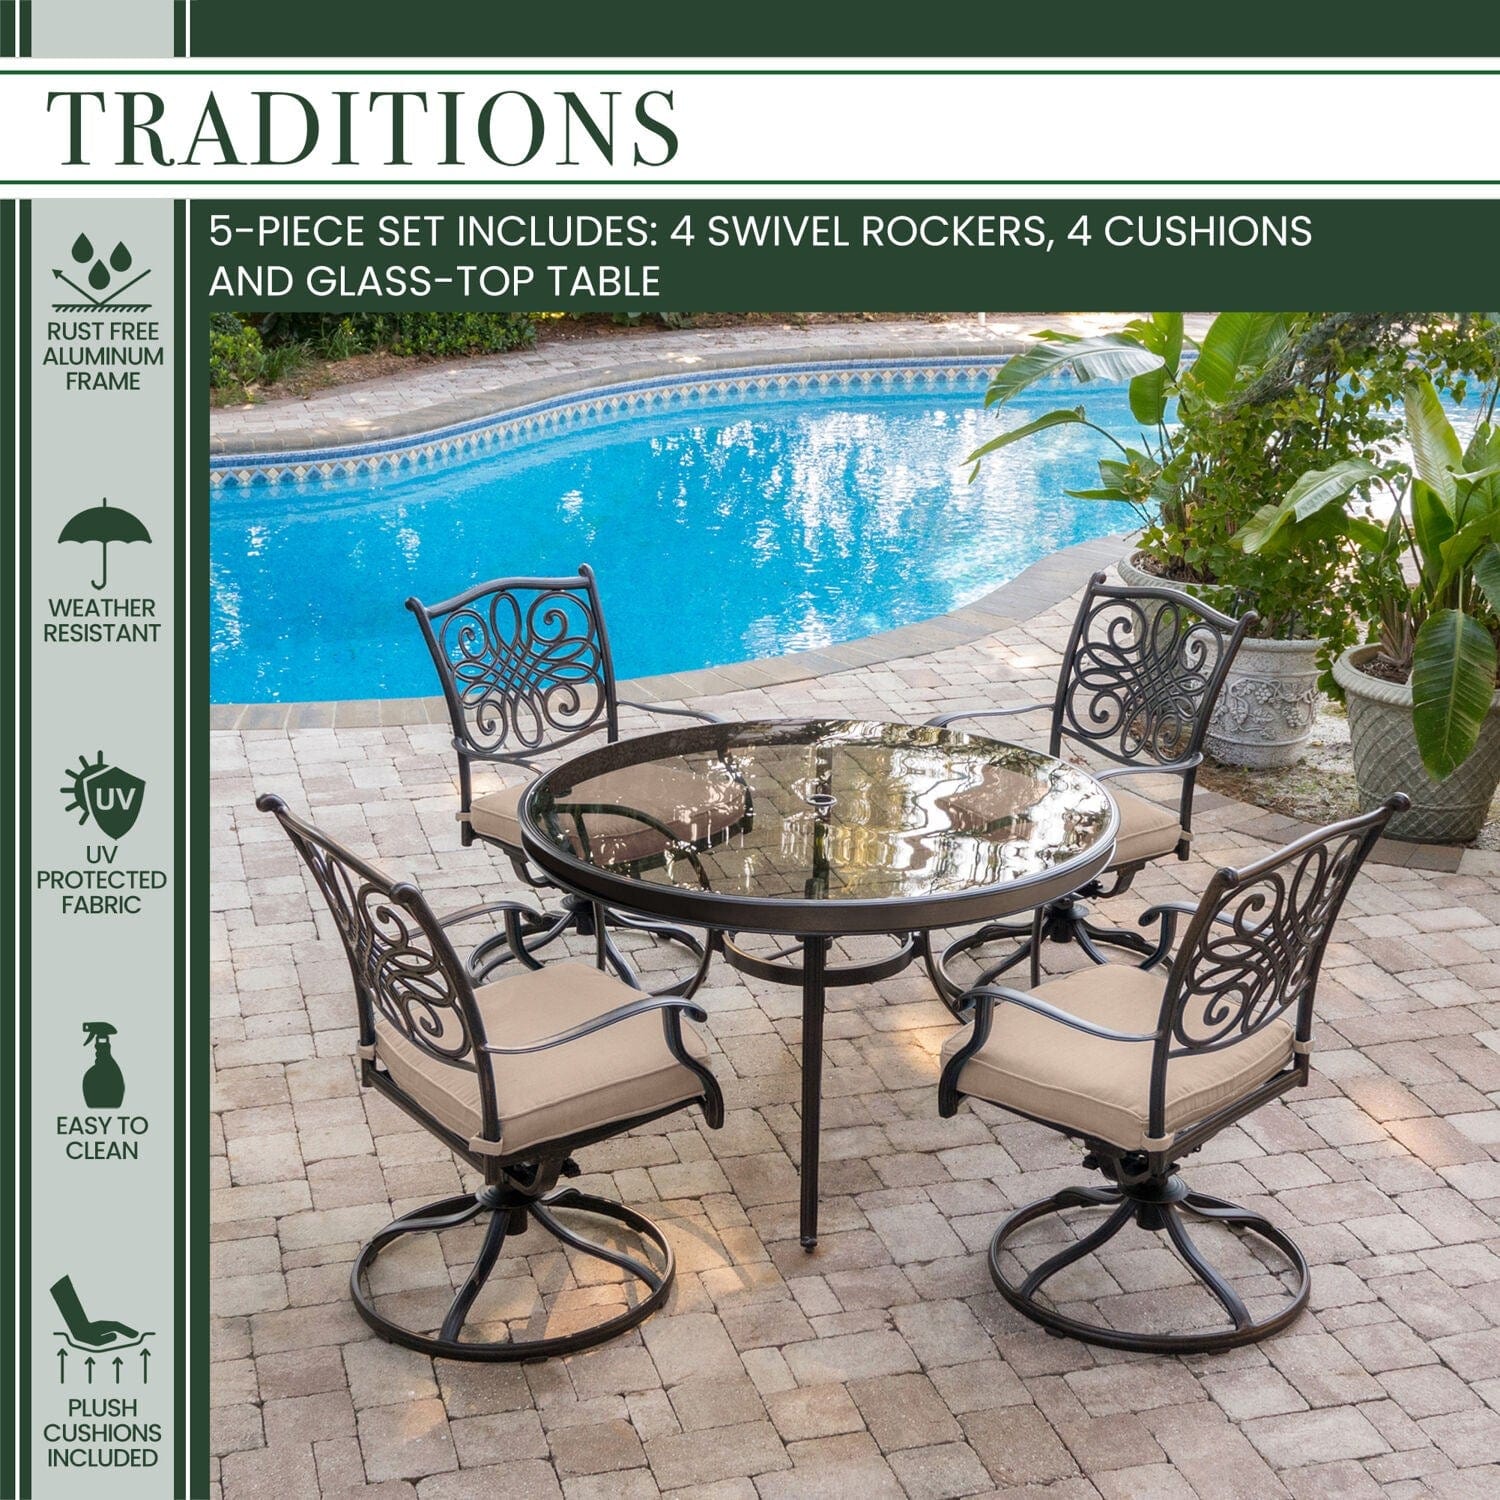 Hanover Outdoor Dining Set Hanover Traditions 5-Piece Dining Set in Aluminum Frame Tan with 48 In. Glass-top Table |TRADDN5PCSWG